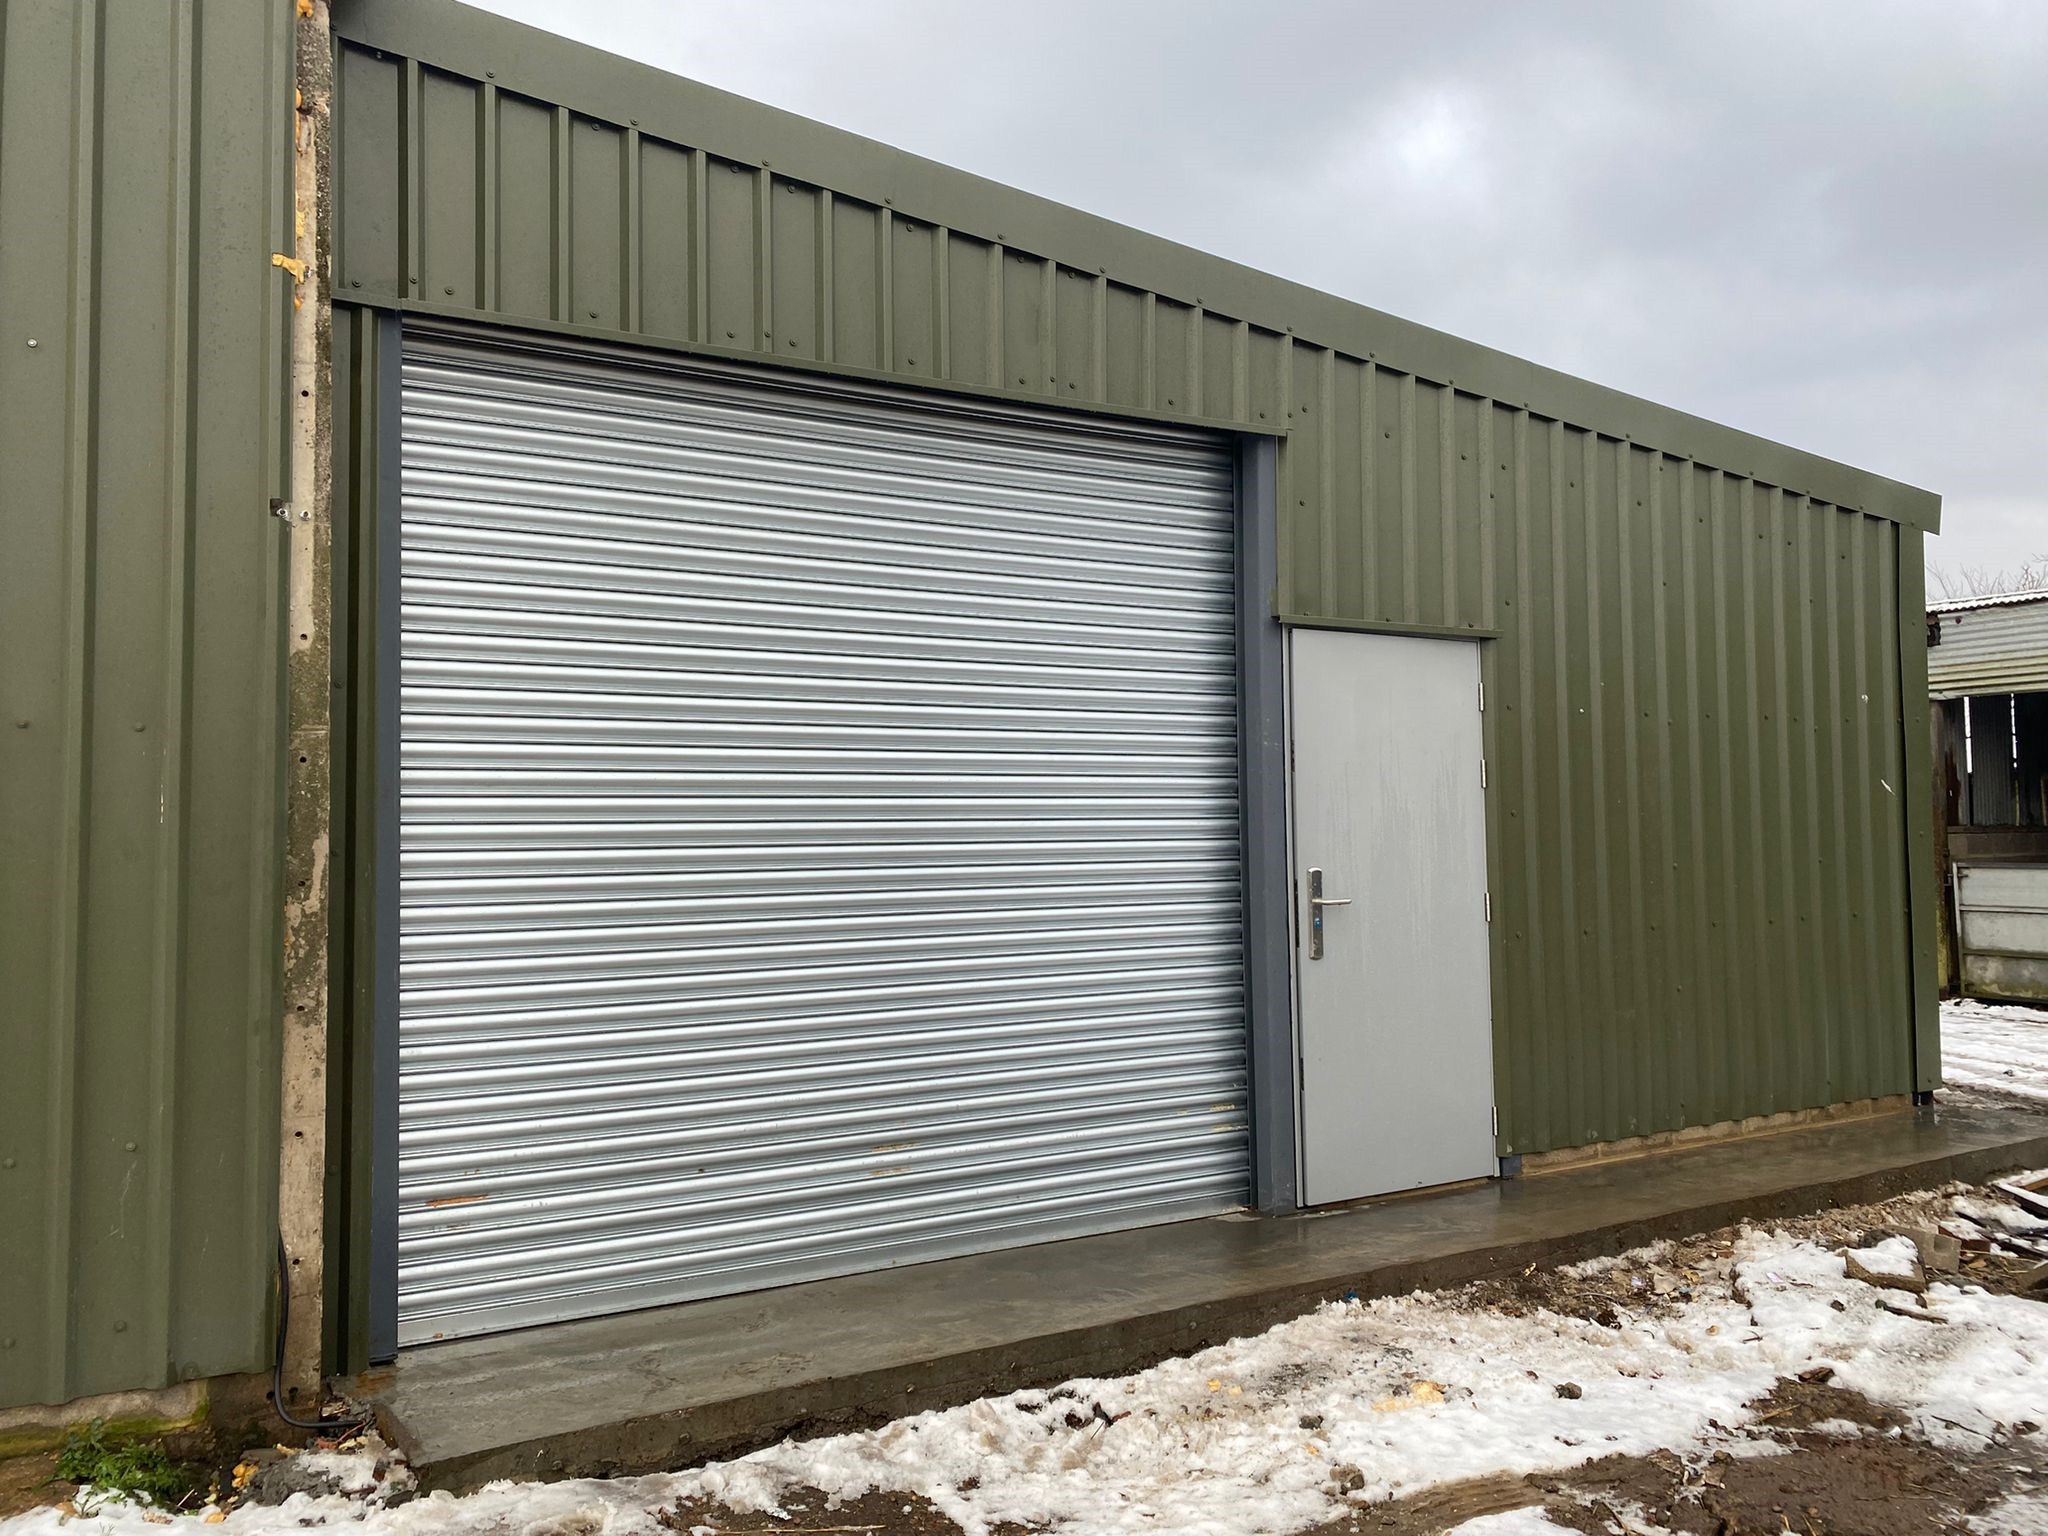 Warehouse to Let in Tolleshunt Knights, near Tiptree, Maldon, Essex – 1,350 sq ft